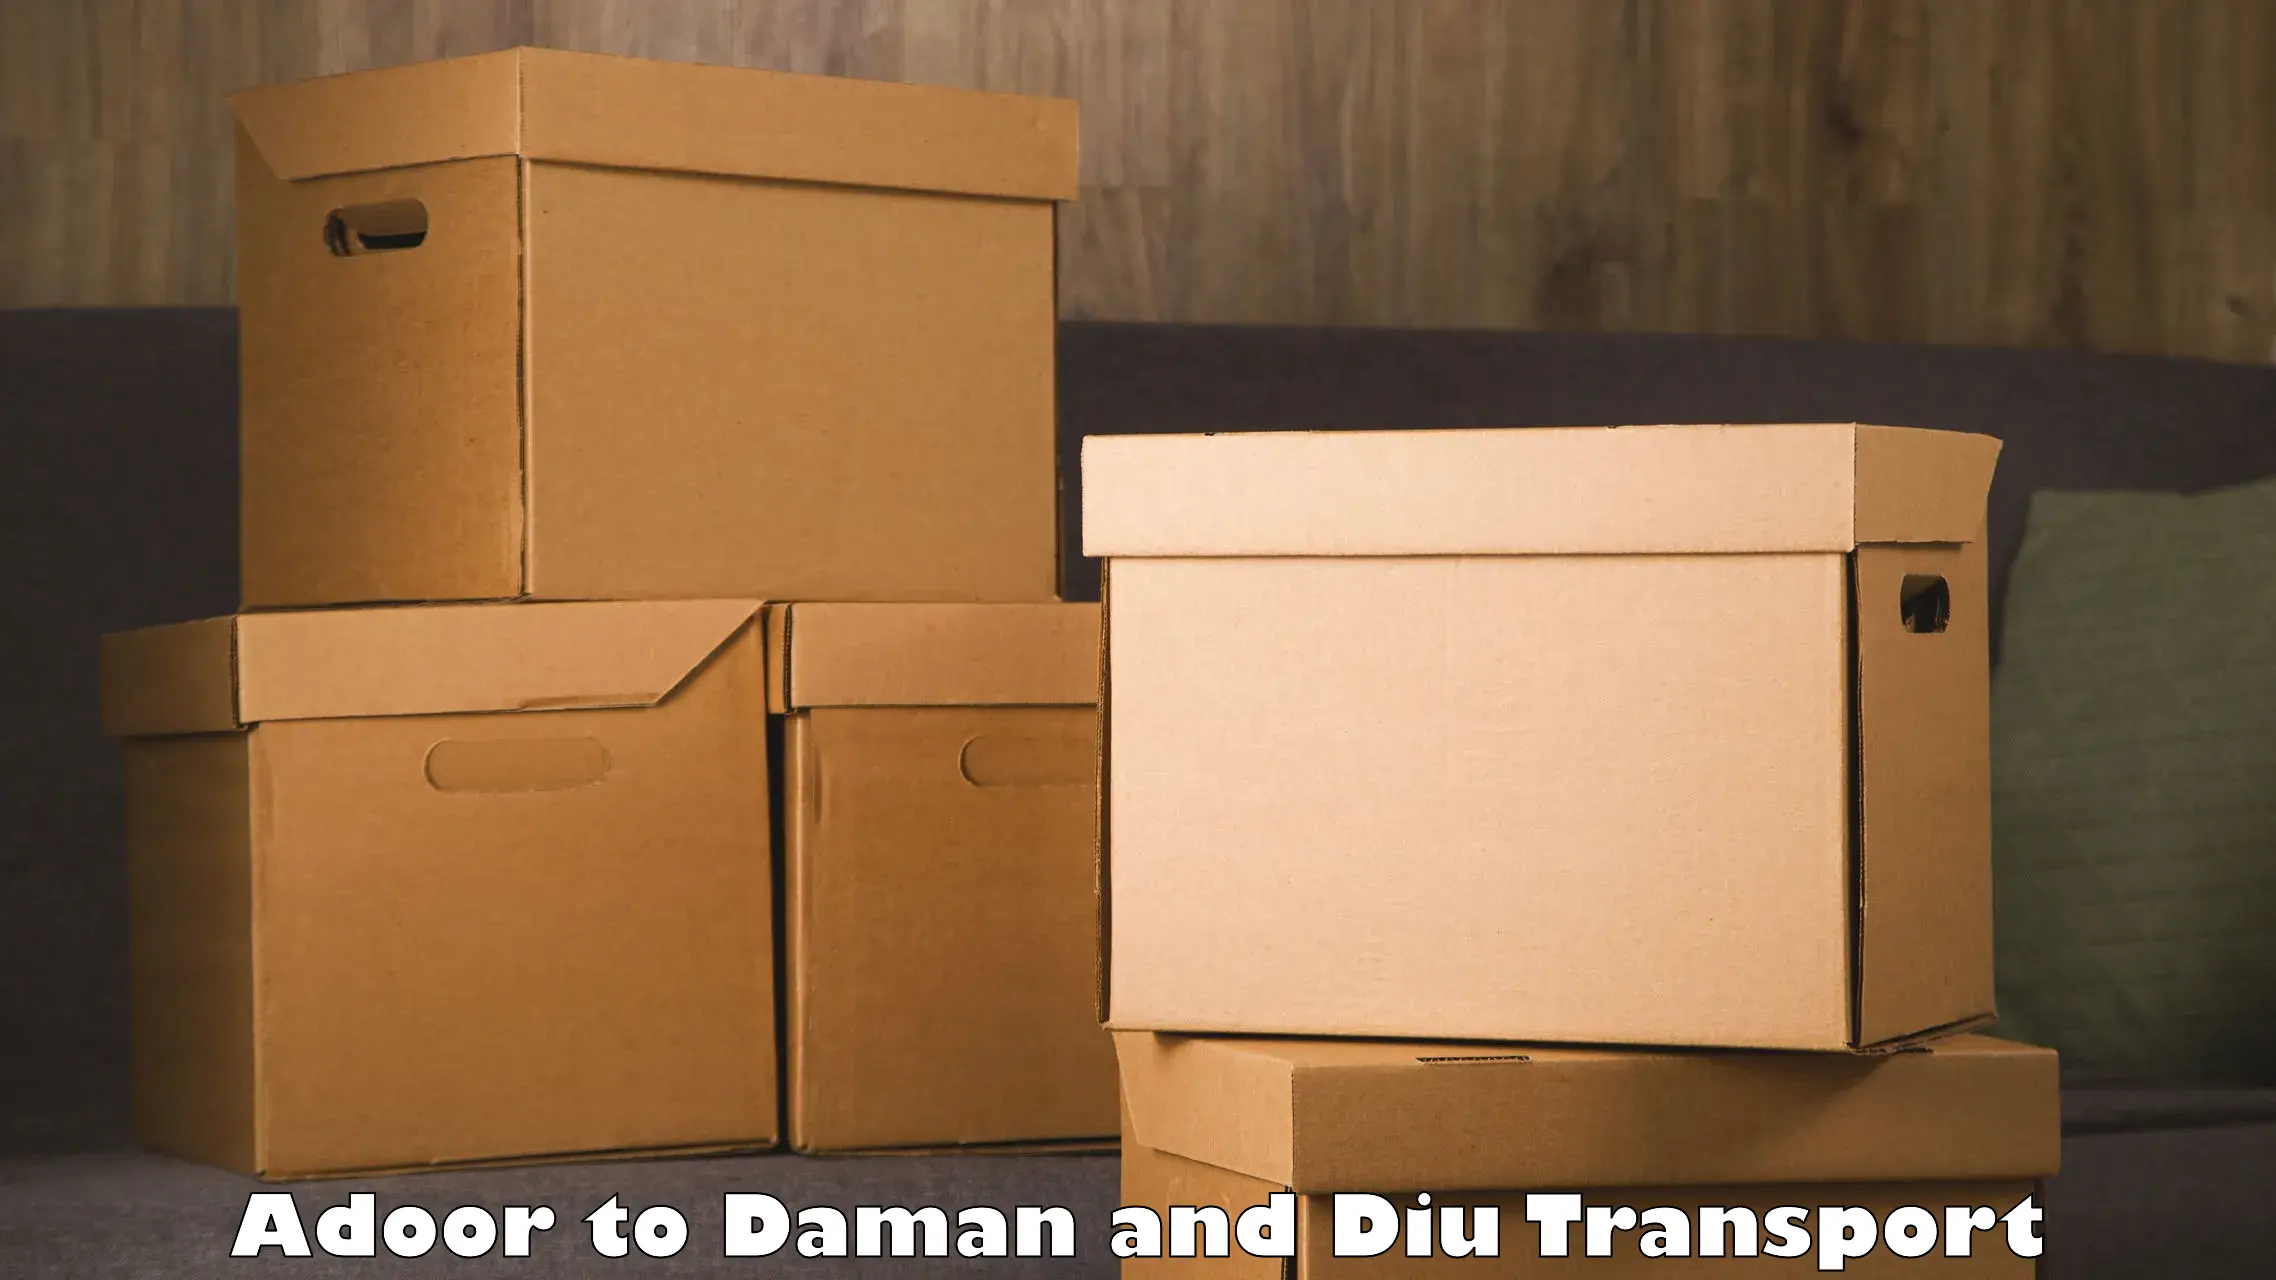 Commercial transport service Adoor to Daman and Diu